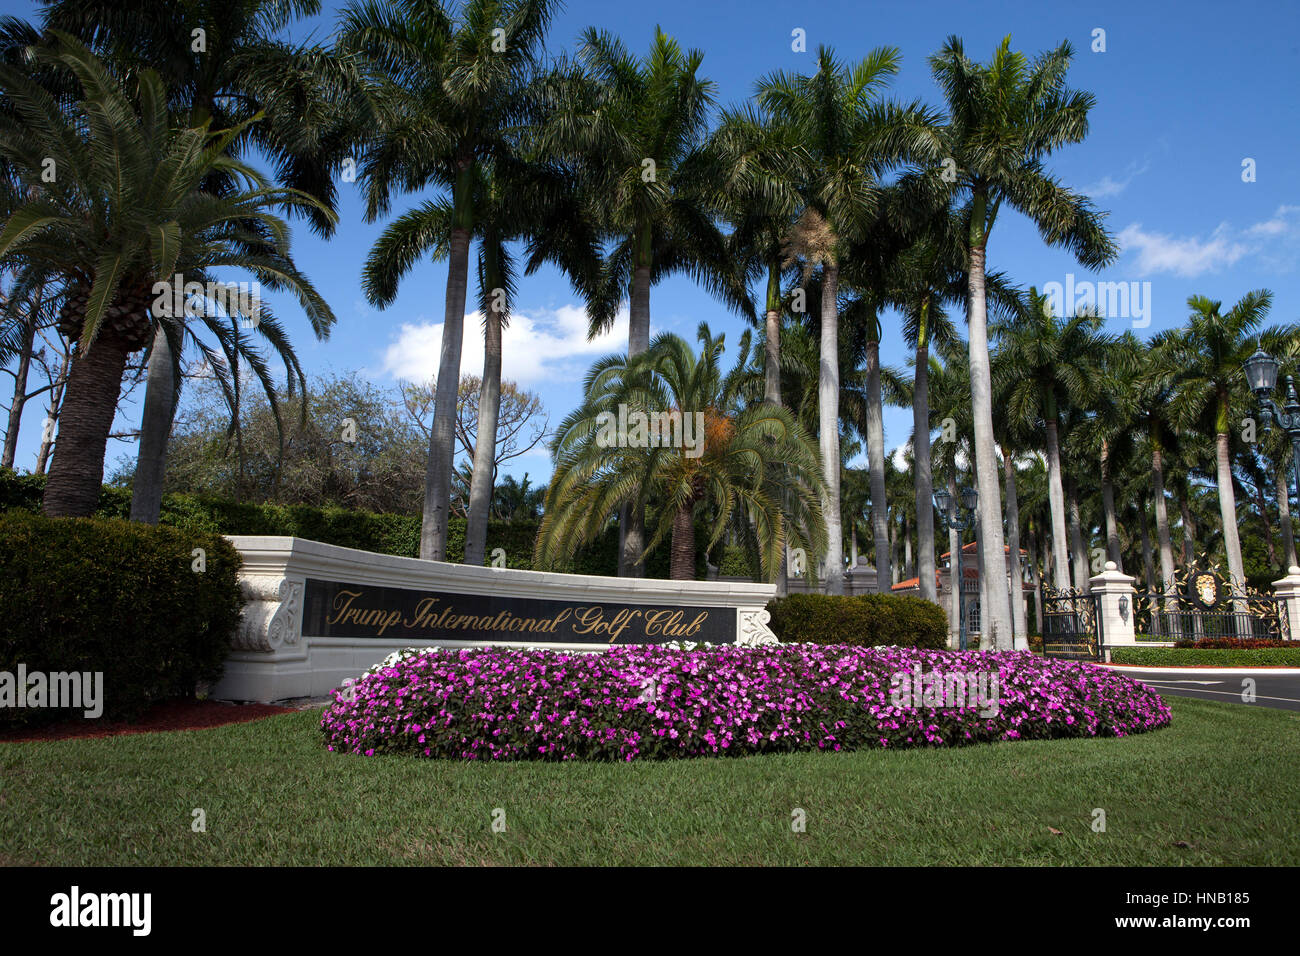 Trump International Golf Club in West Palm Beach, where President Trump frequently plays golf. The club is a short drive from his winter White House M Stock Photo